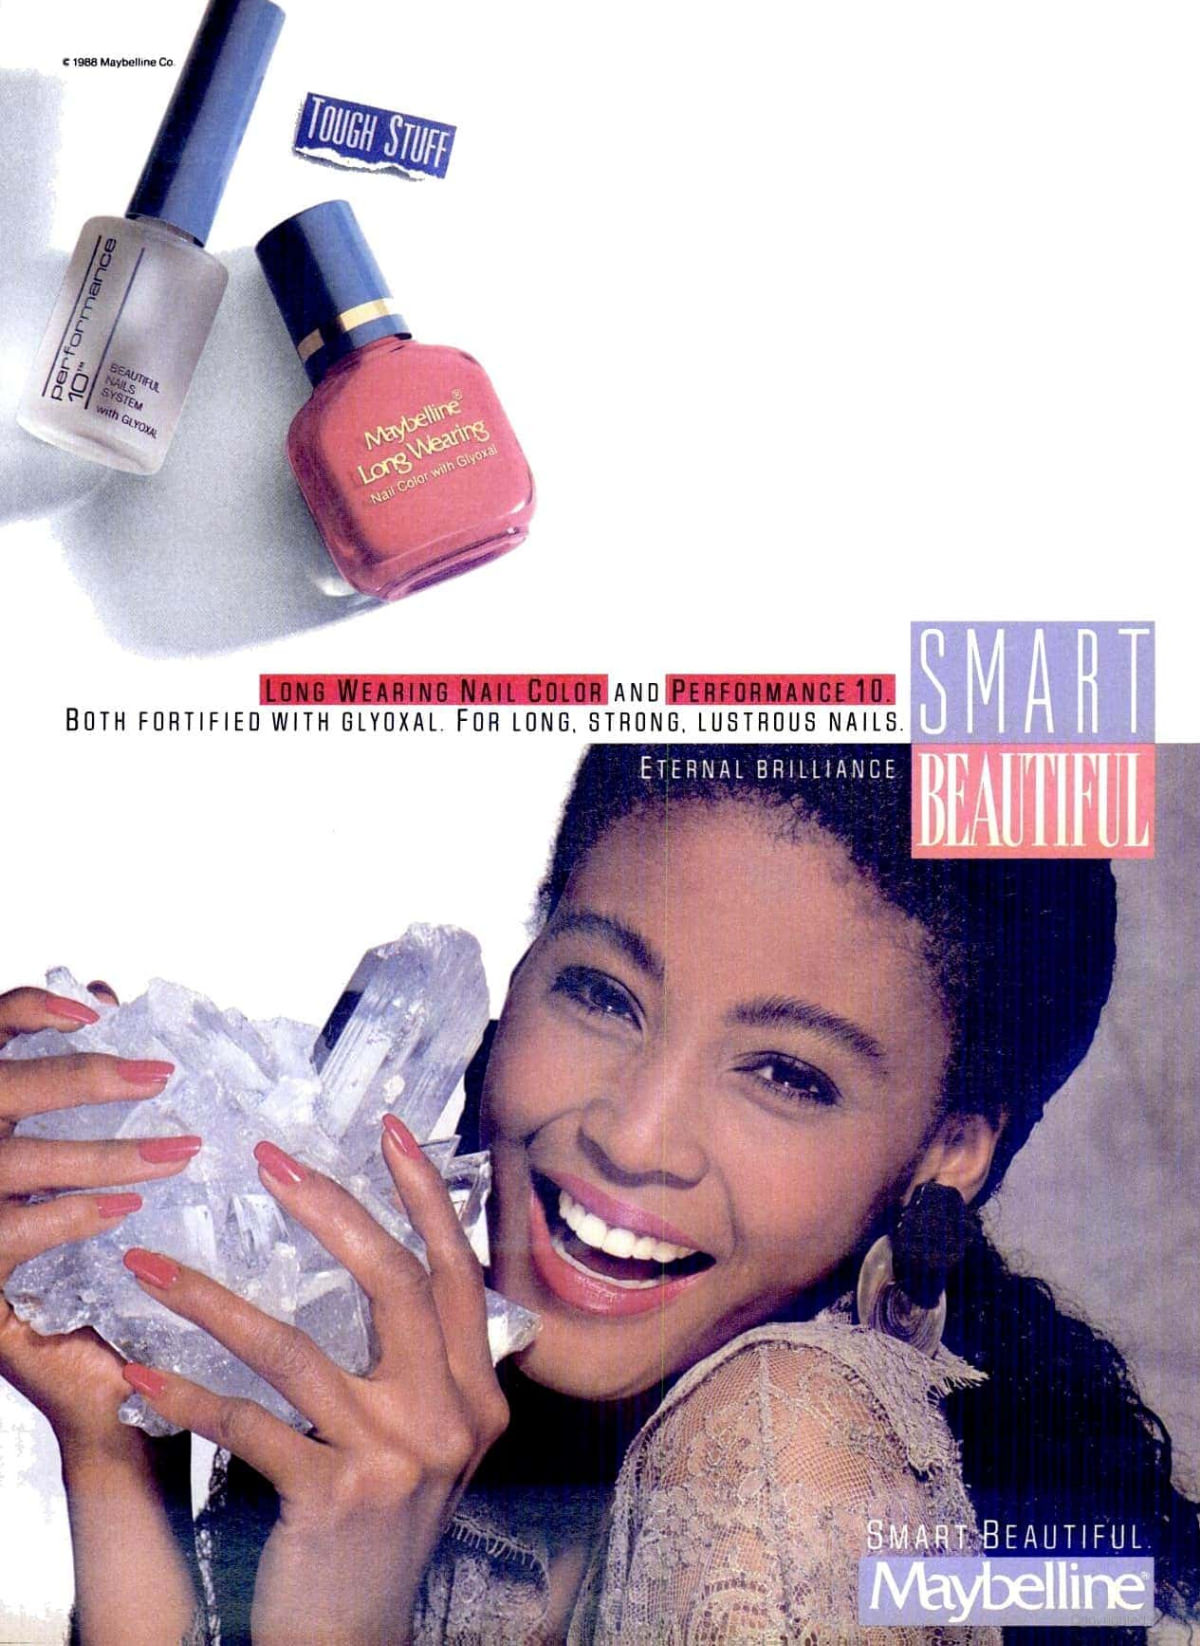 Maybelline Long Wearing nail color and Performance 10, 1989.